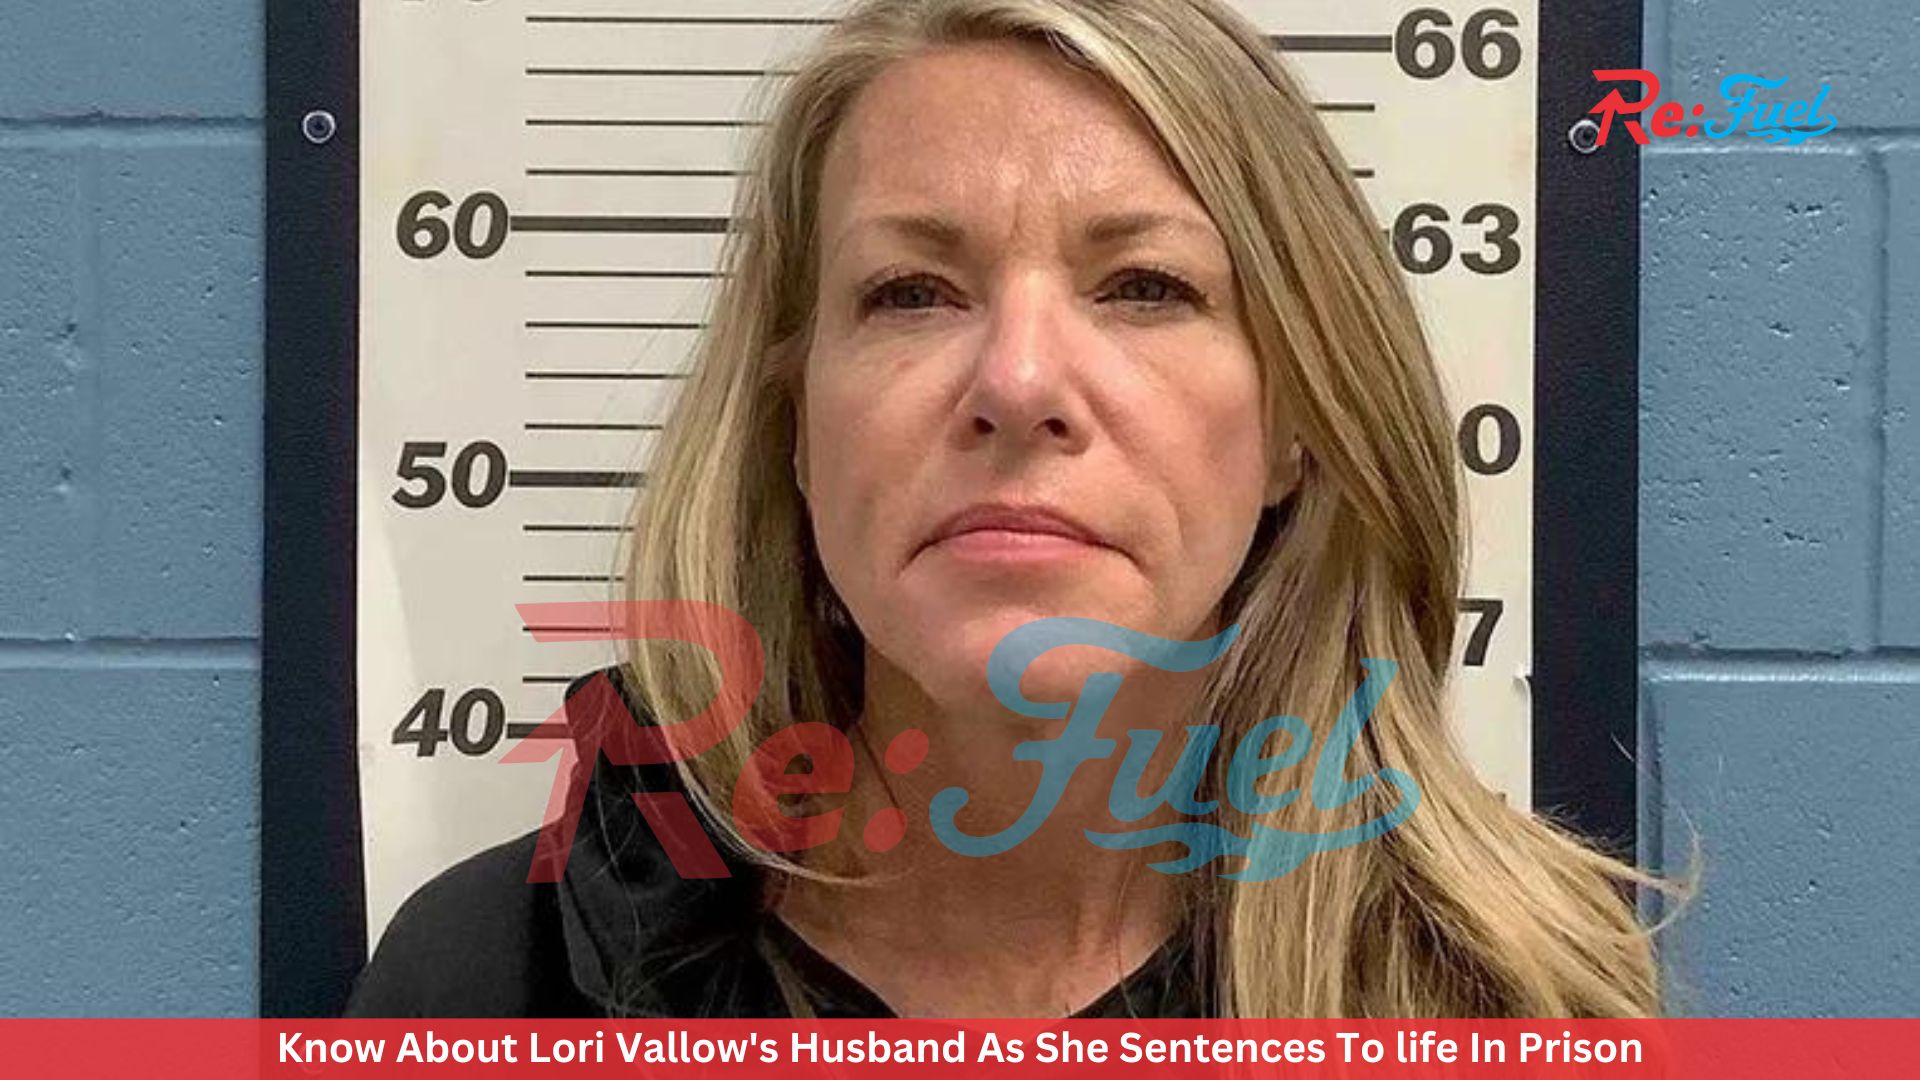 Know About Lori Vallow's Husband As She Sentences To life In Prison